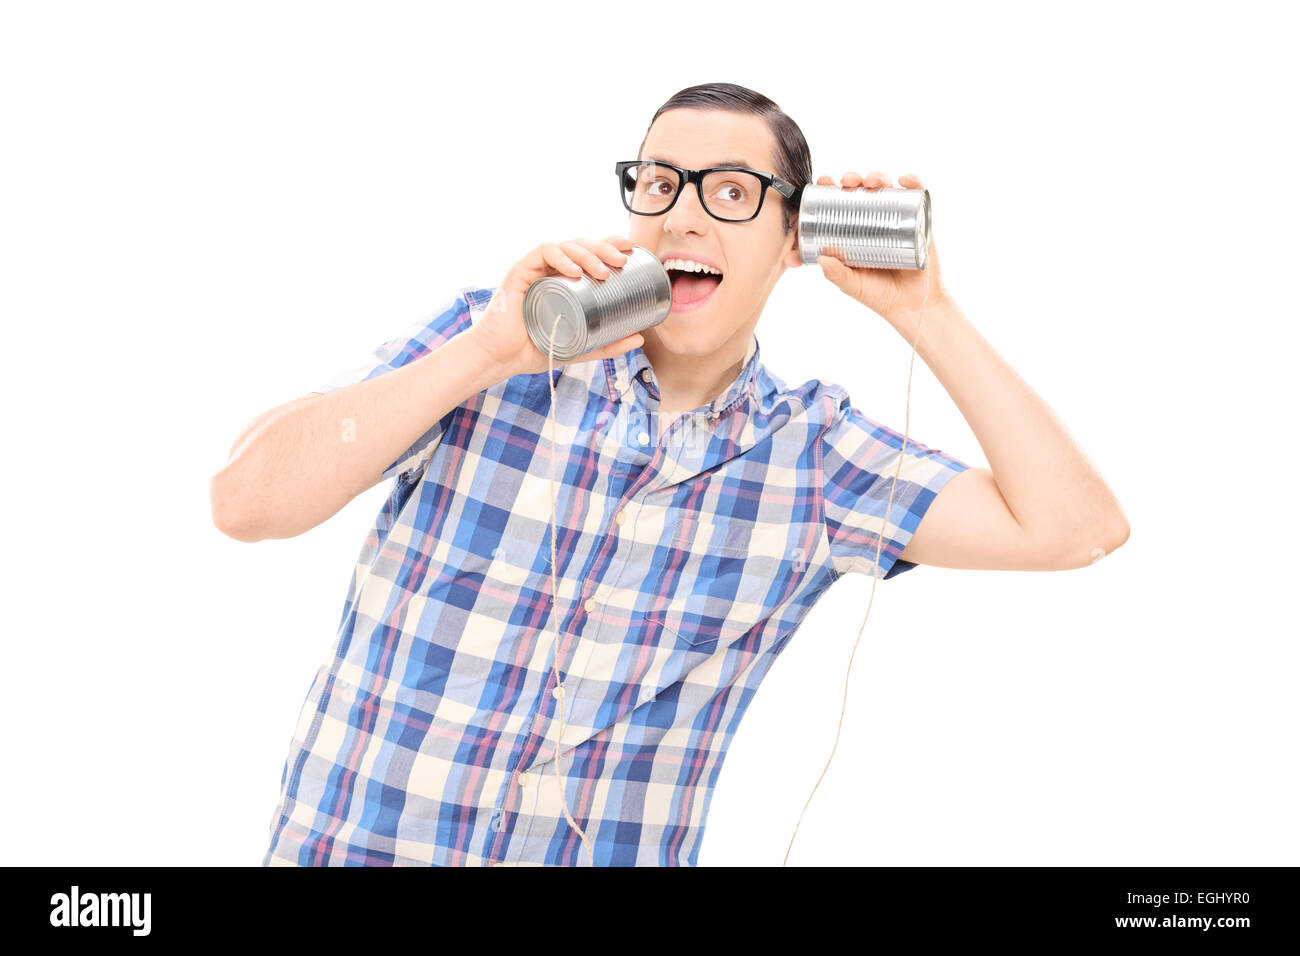 Silly man talking to himself through tin can phone isolated on white background Stock Photo